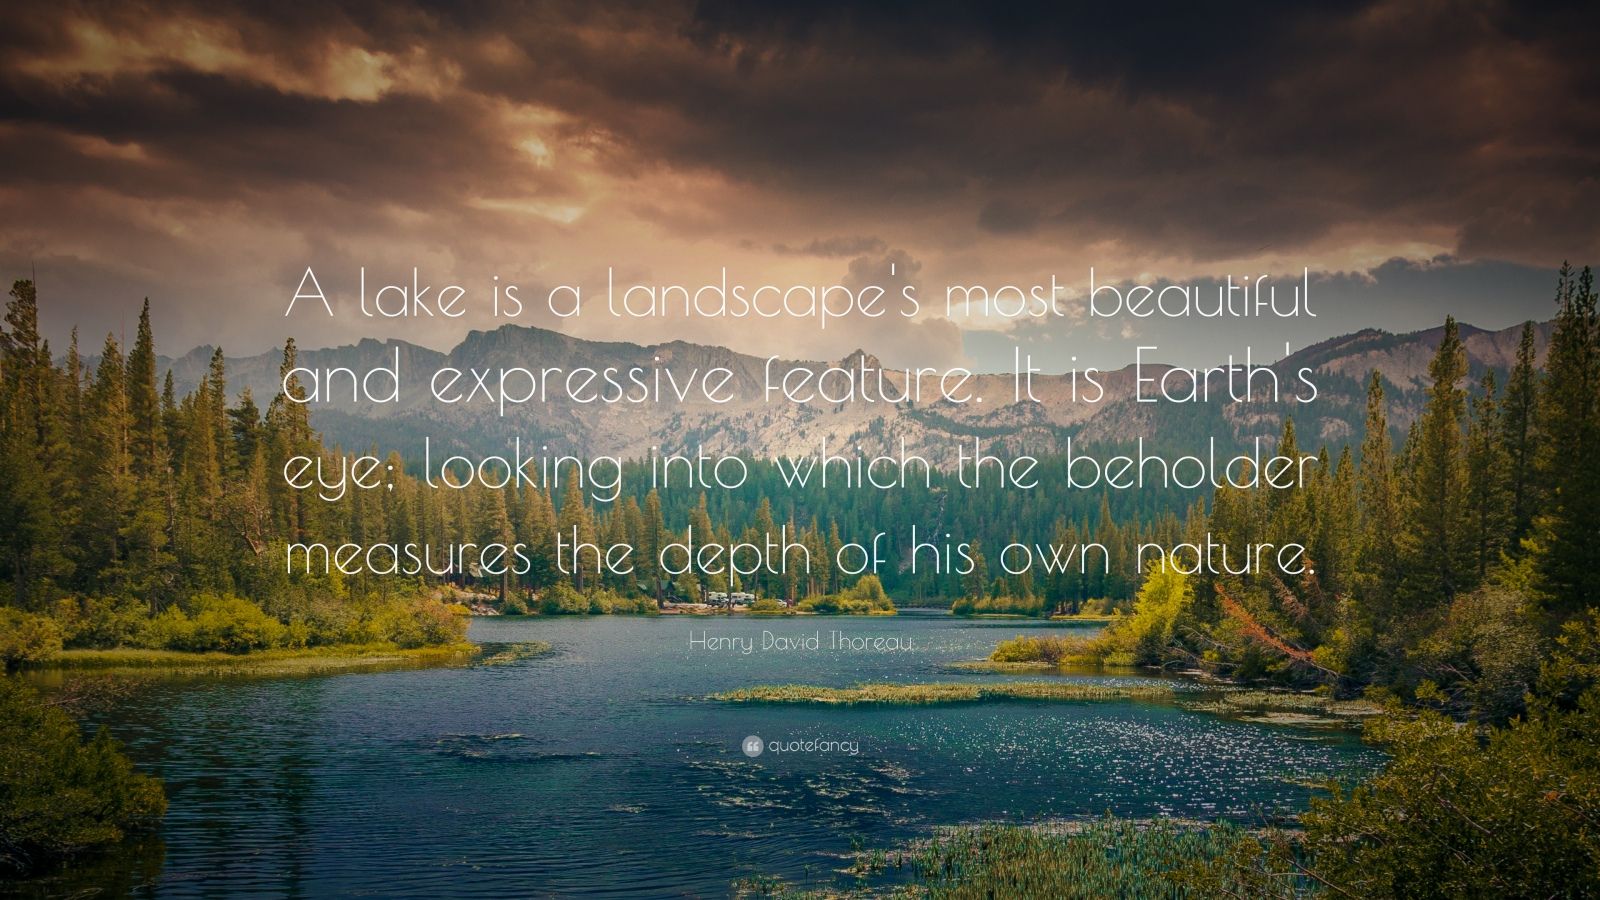 Henry David Thoreau Quote: “A lake is a landscape's most beautiful and